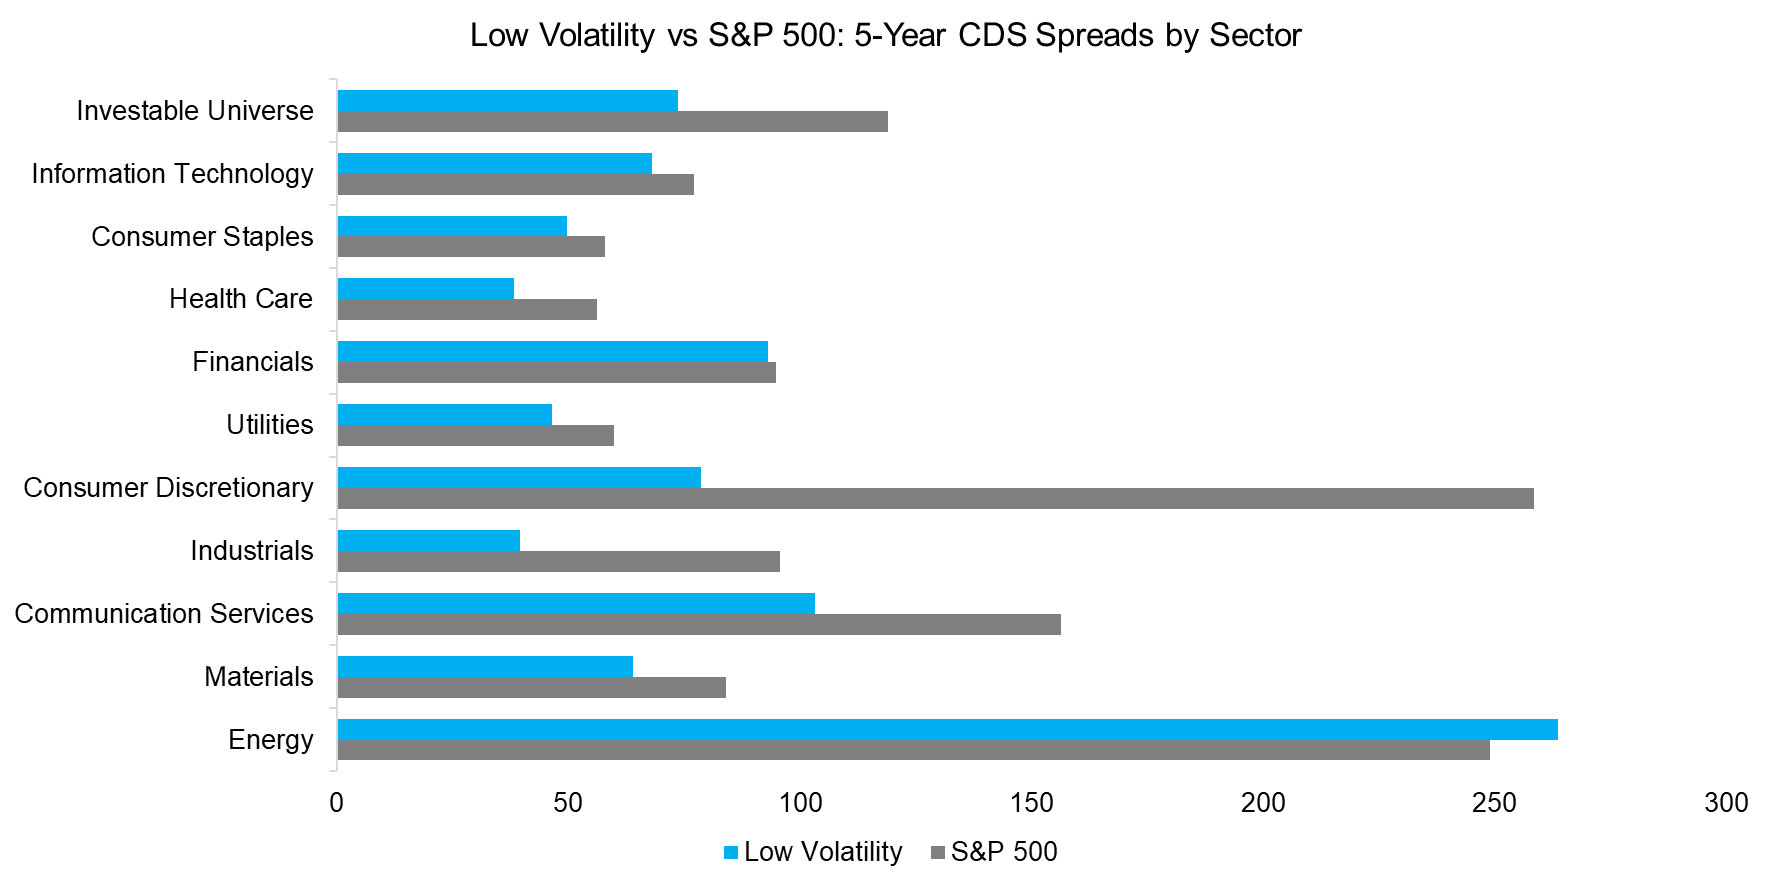 Low Volatility vs S&P 500 5-Year CDS Spreads by Sector